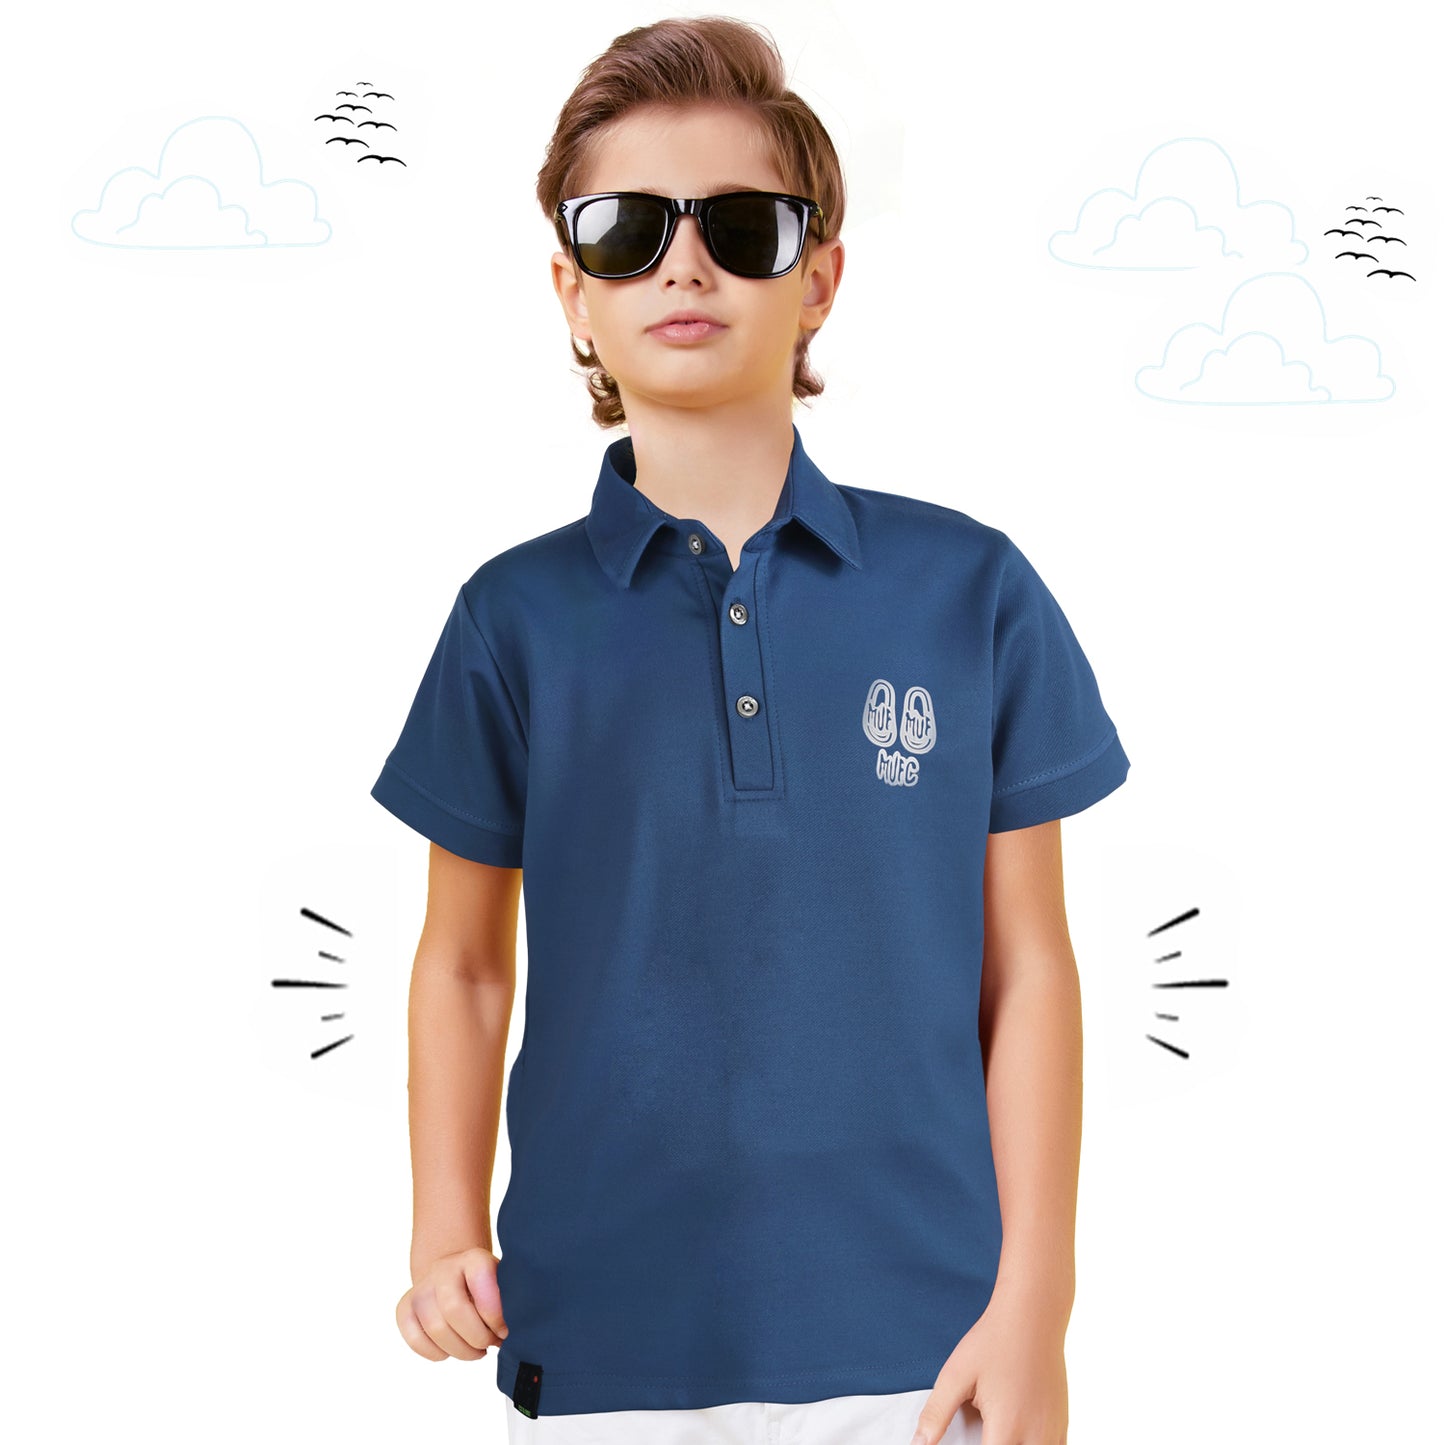 Unleash the Cool: Boys' Polo T-Shirt for Effortless Style!